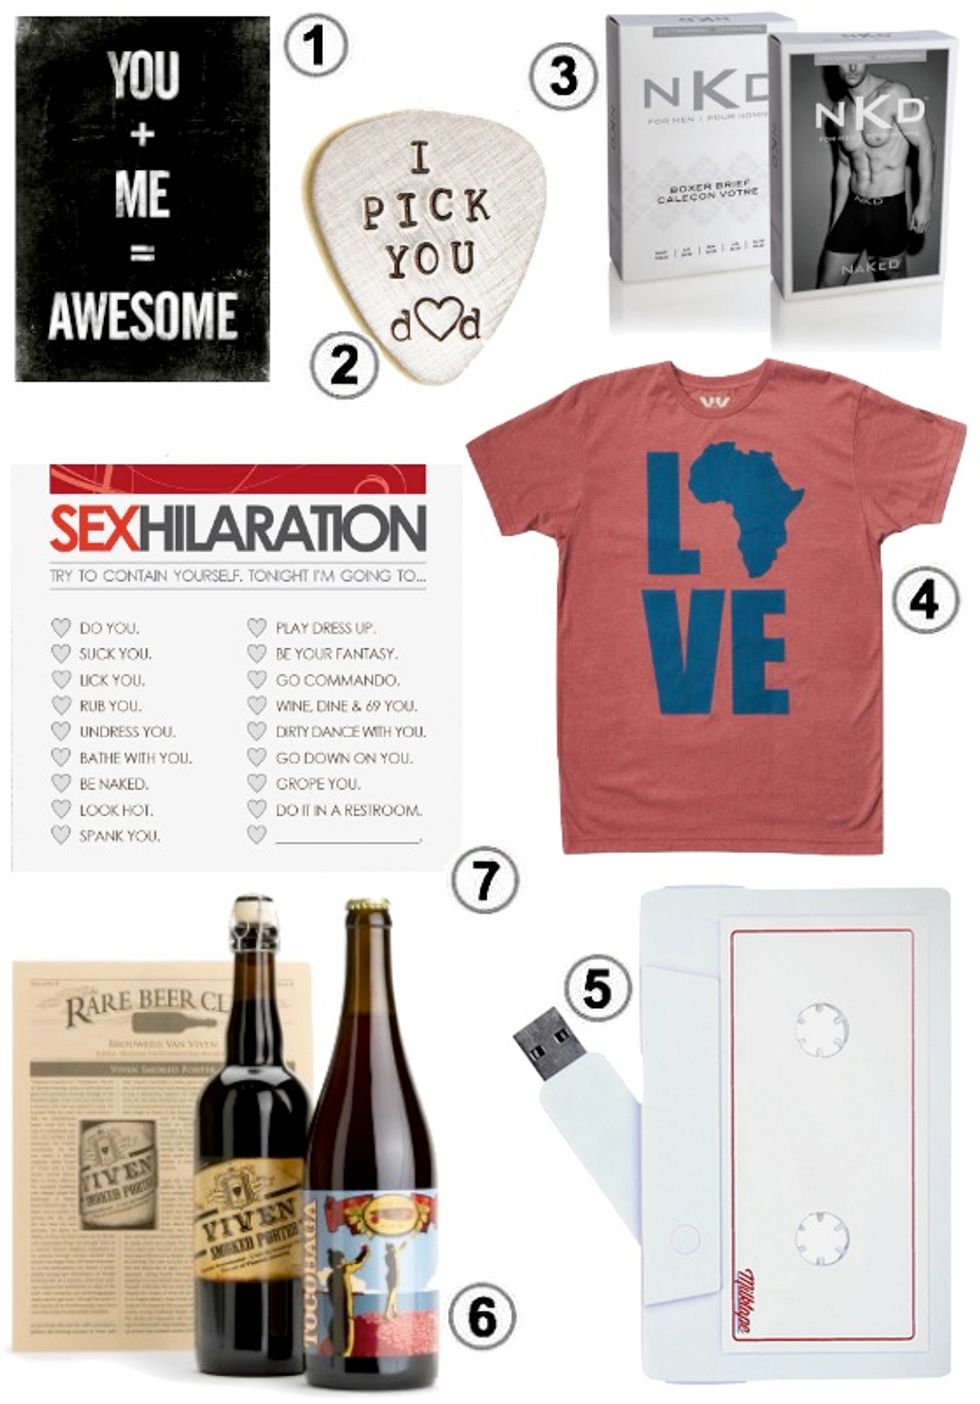 Look of the Week: Sweet Valentine's Day Gifts for Dudes